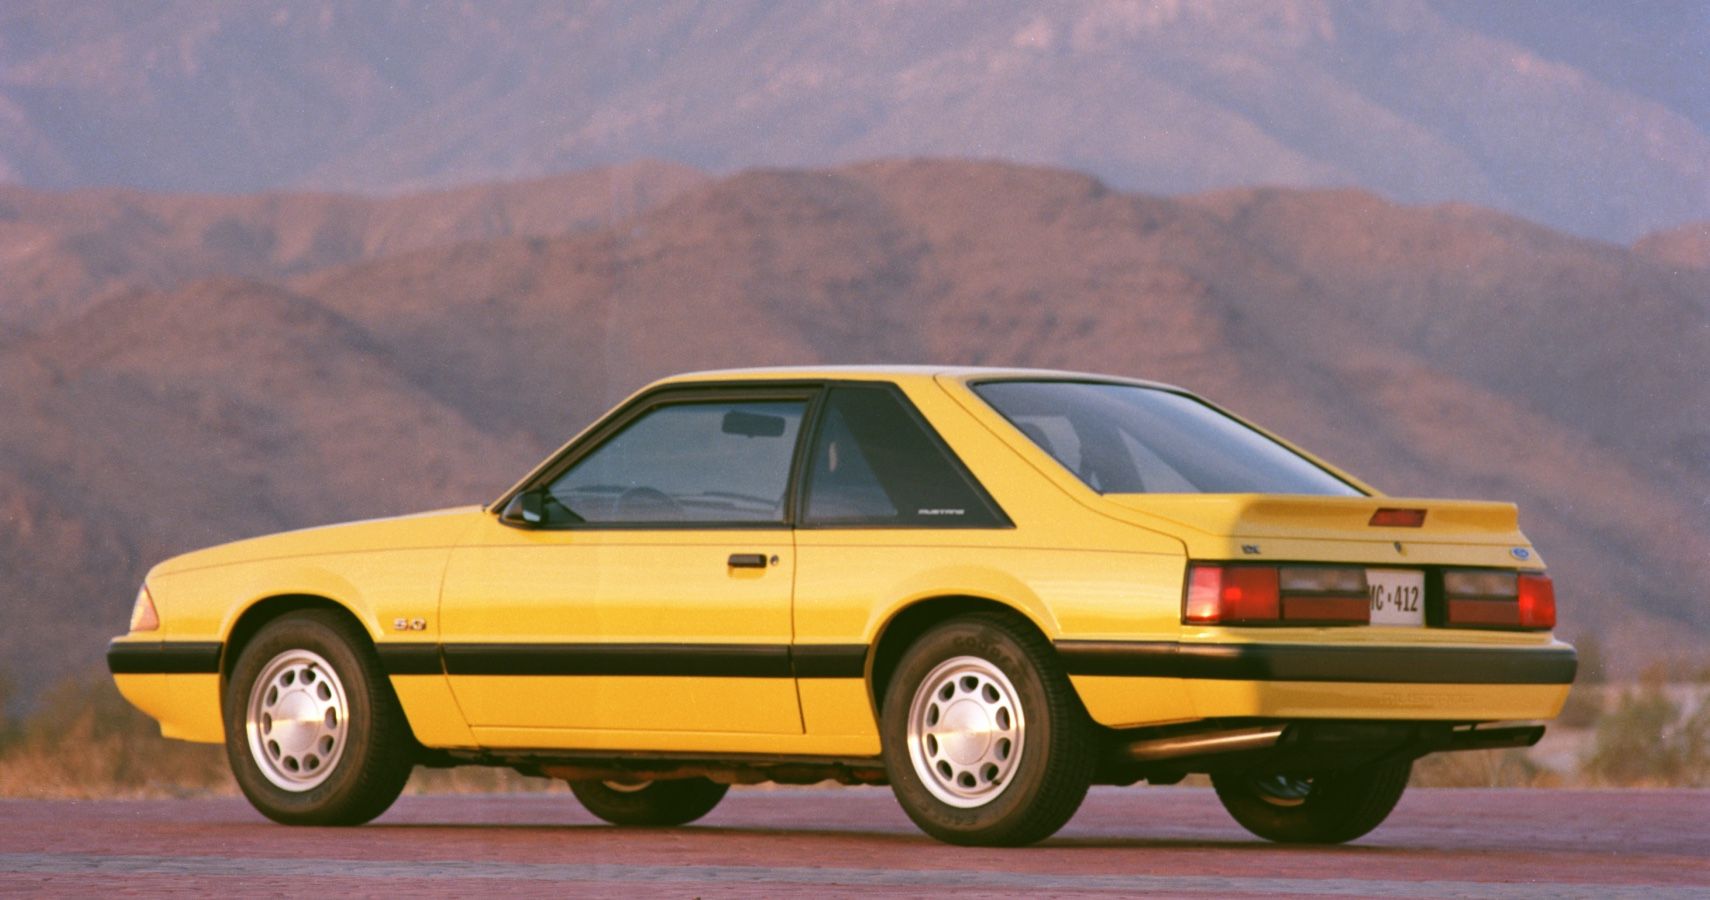 1990 Ford Mustang LX Hatchback Yellow in Desert Mountains